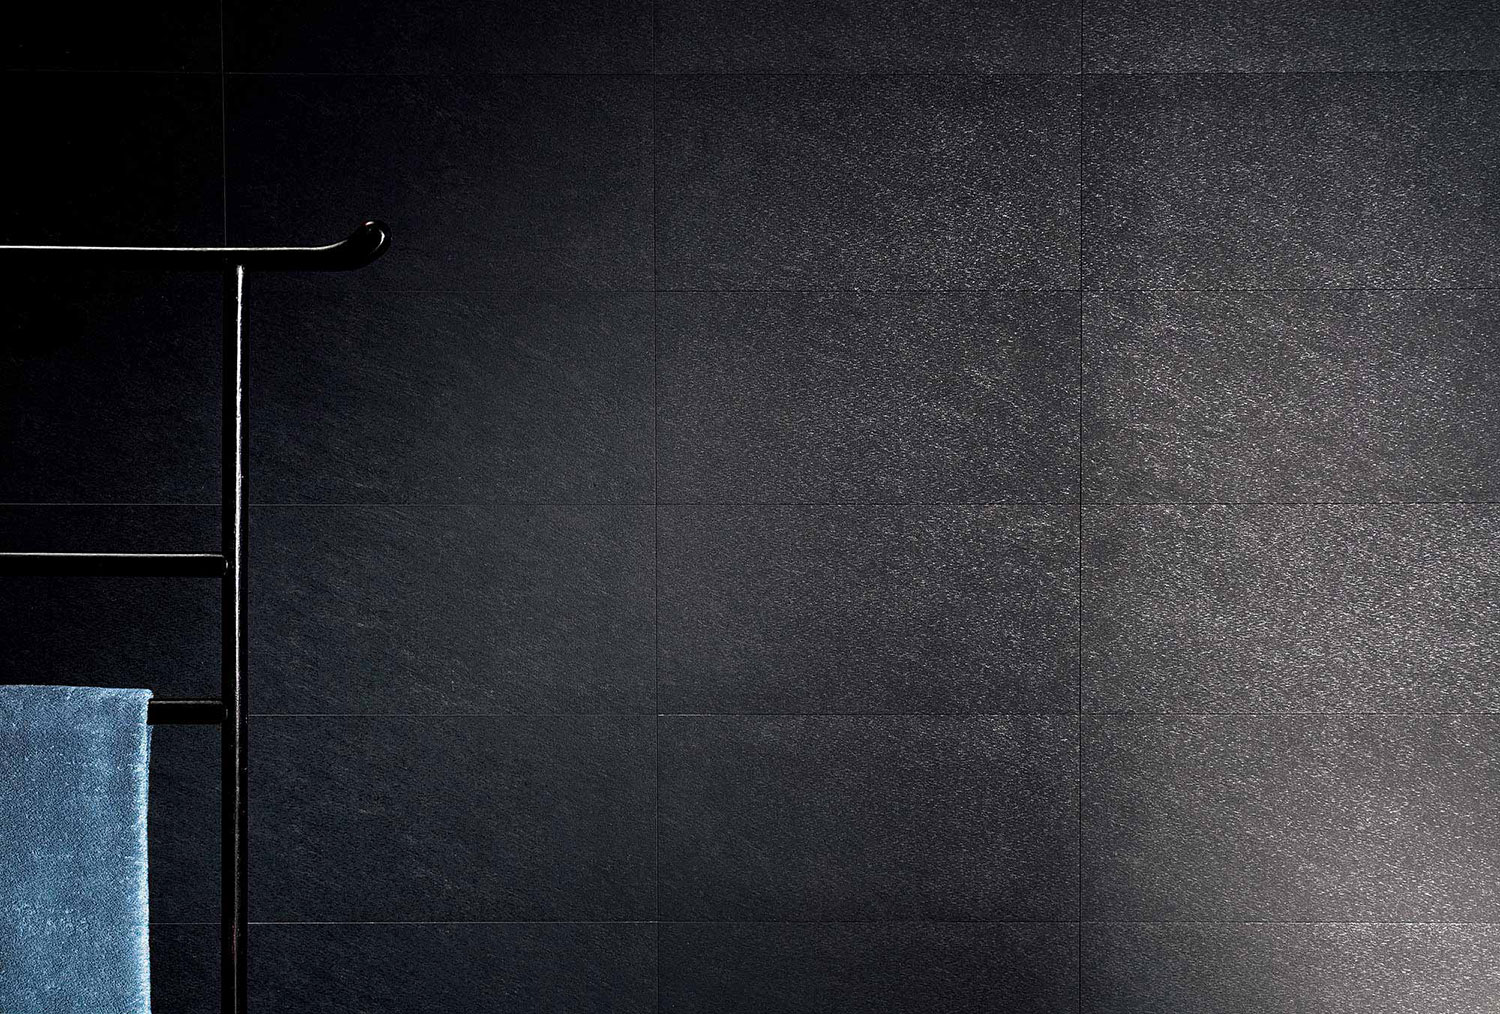 Glossy Black Tile Texture